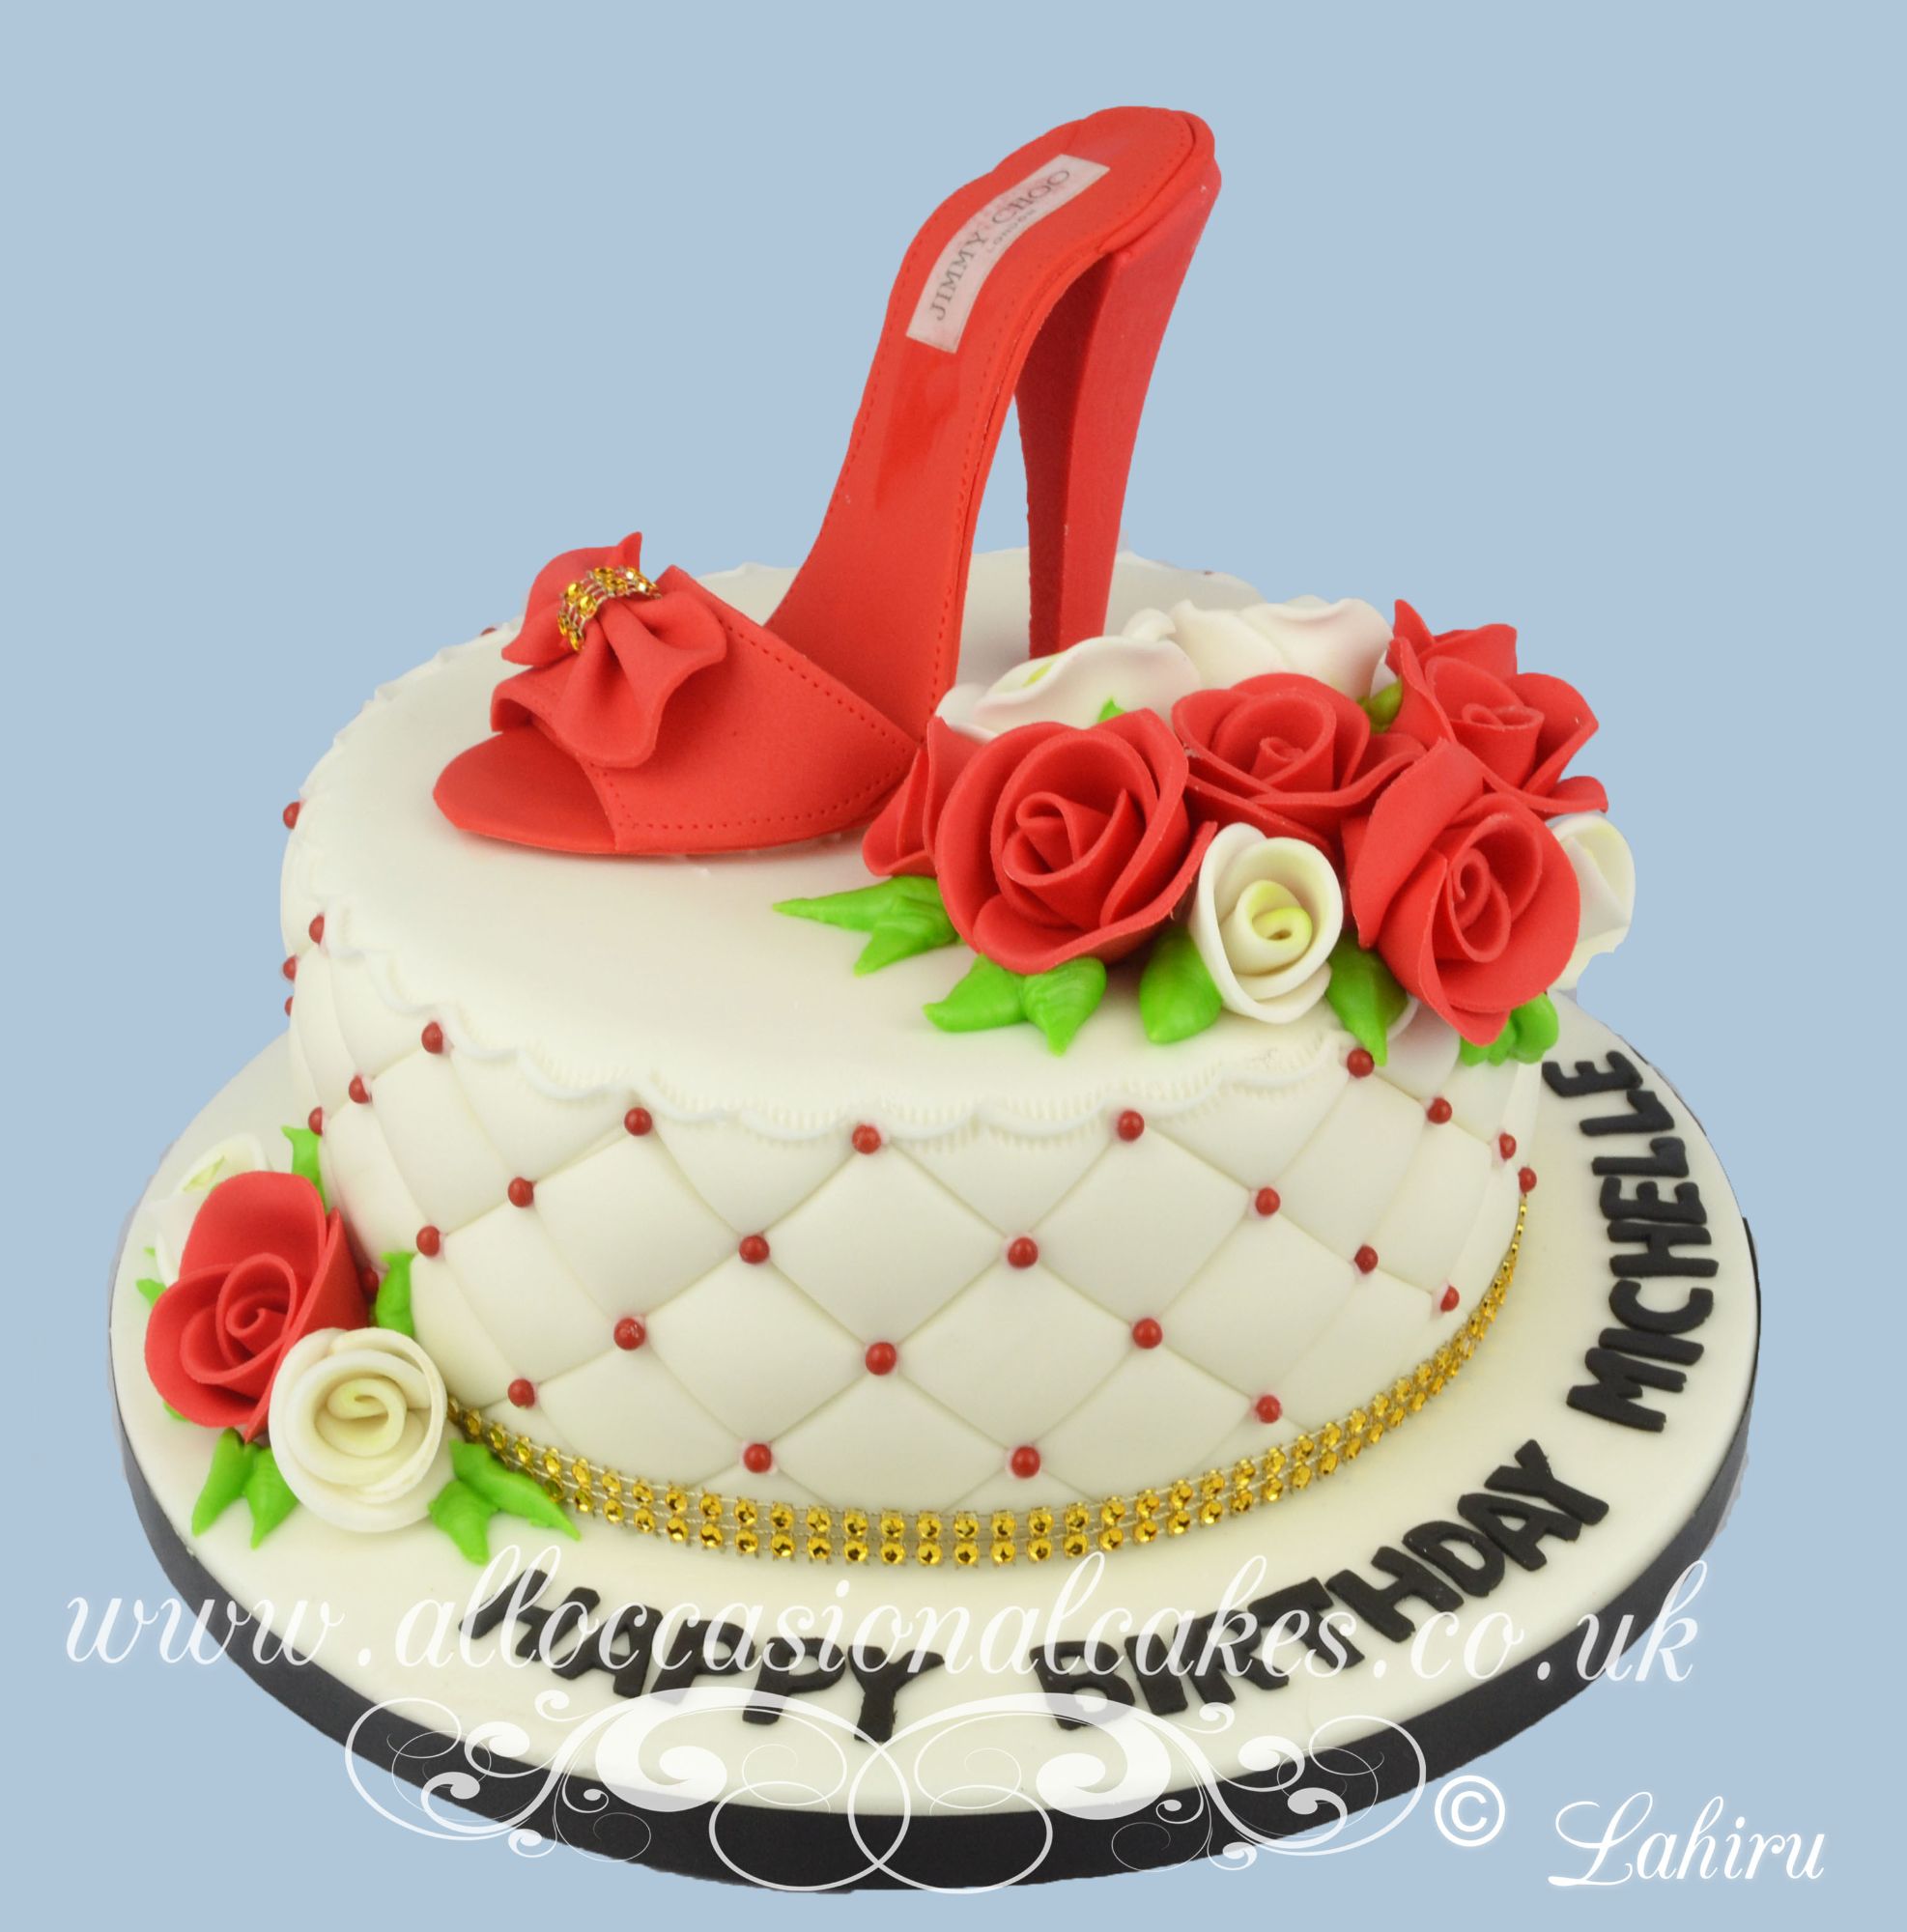 Adult Birthday Cake | Yummy Mummys Cakes – Cakes for all occasions!